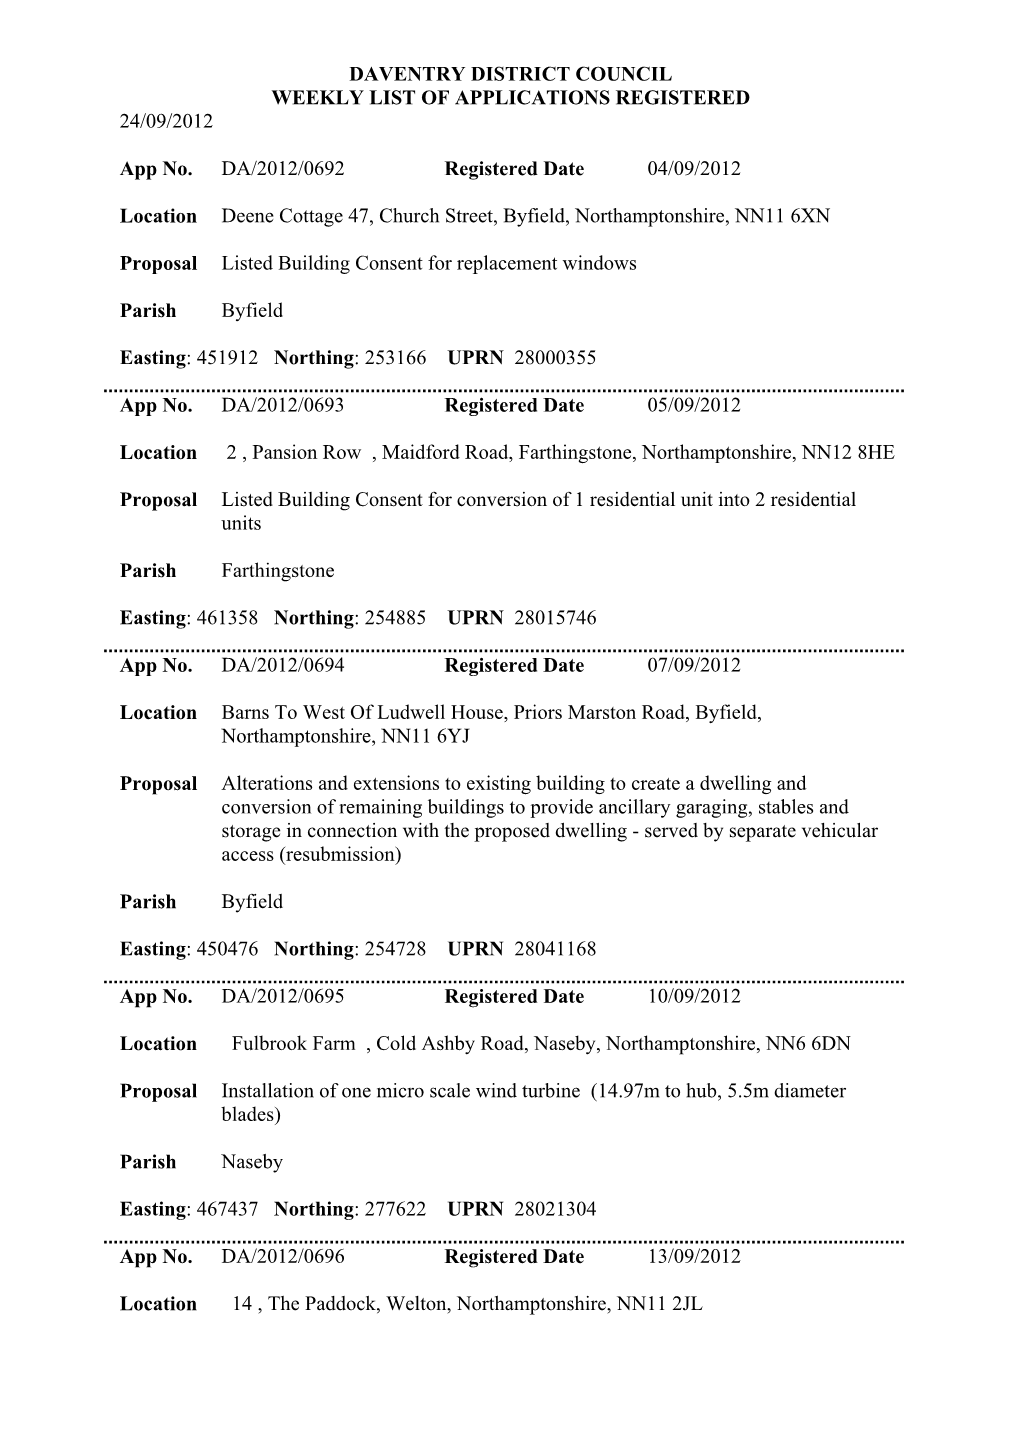 Daventry District Council Weekly List of Applications Registered 24/09/2012